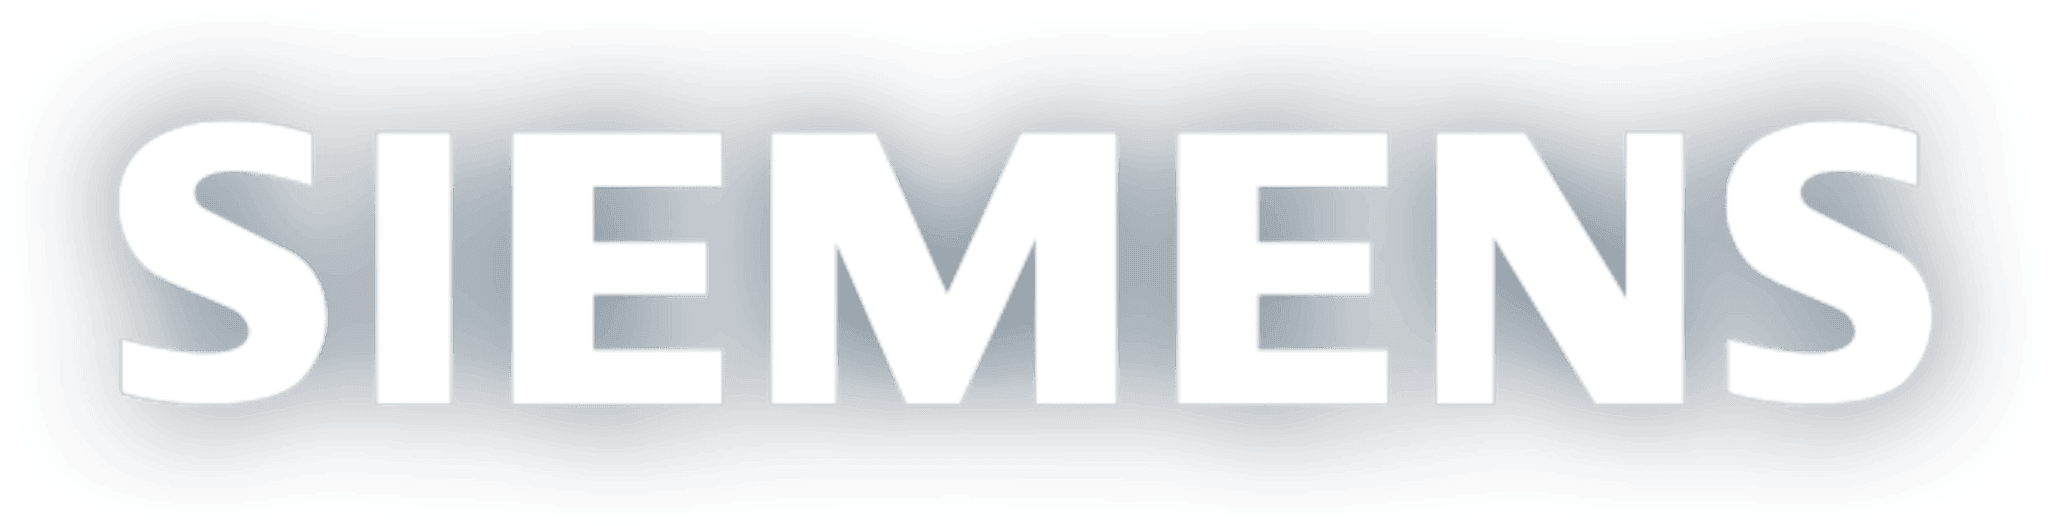 The Siemens logo displays the brand name 'Siemens' in a white-colored font, featuring a distinctive 'S'.